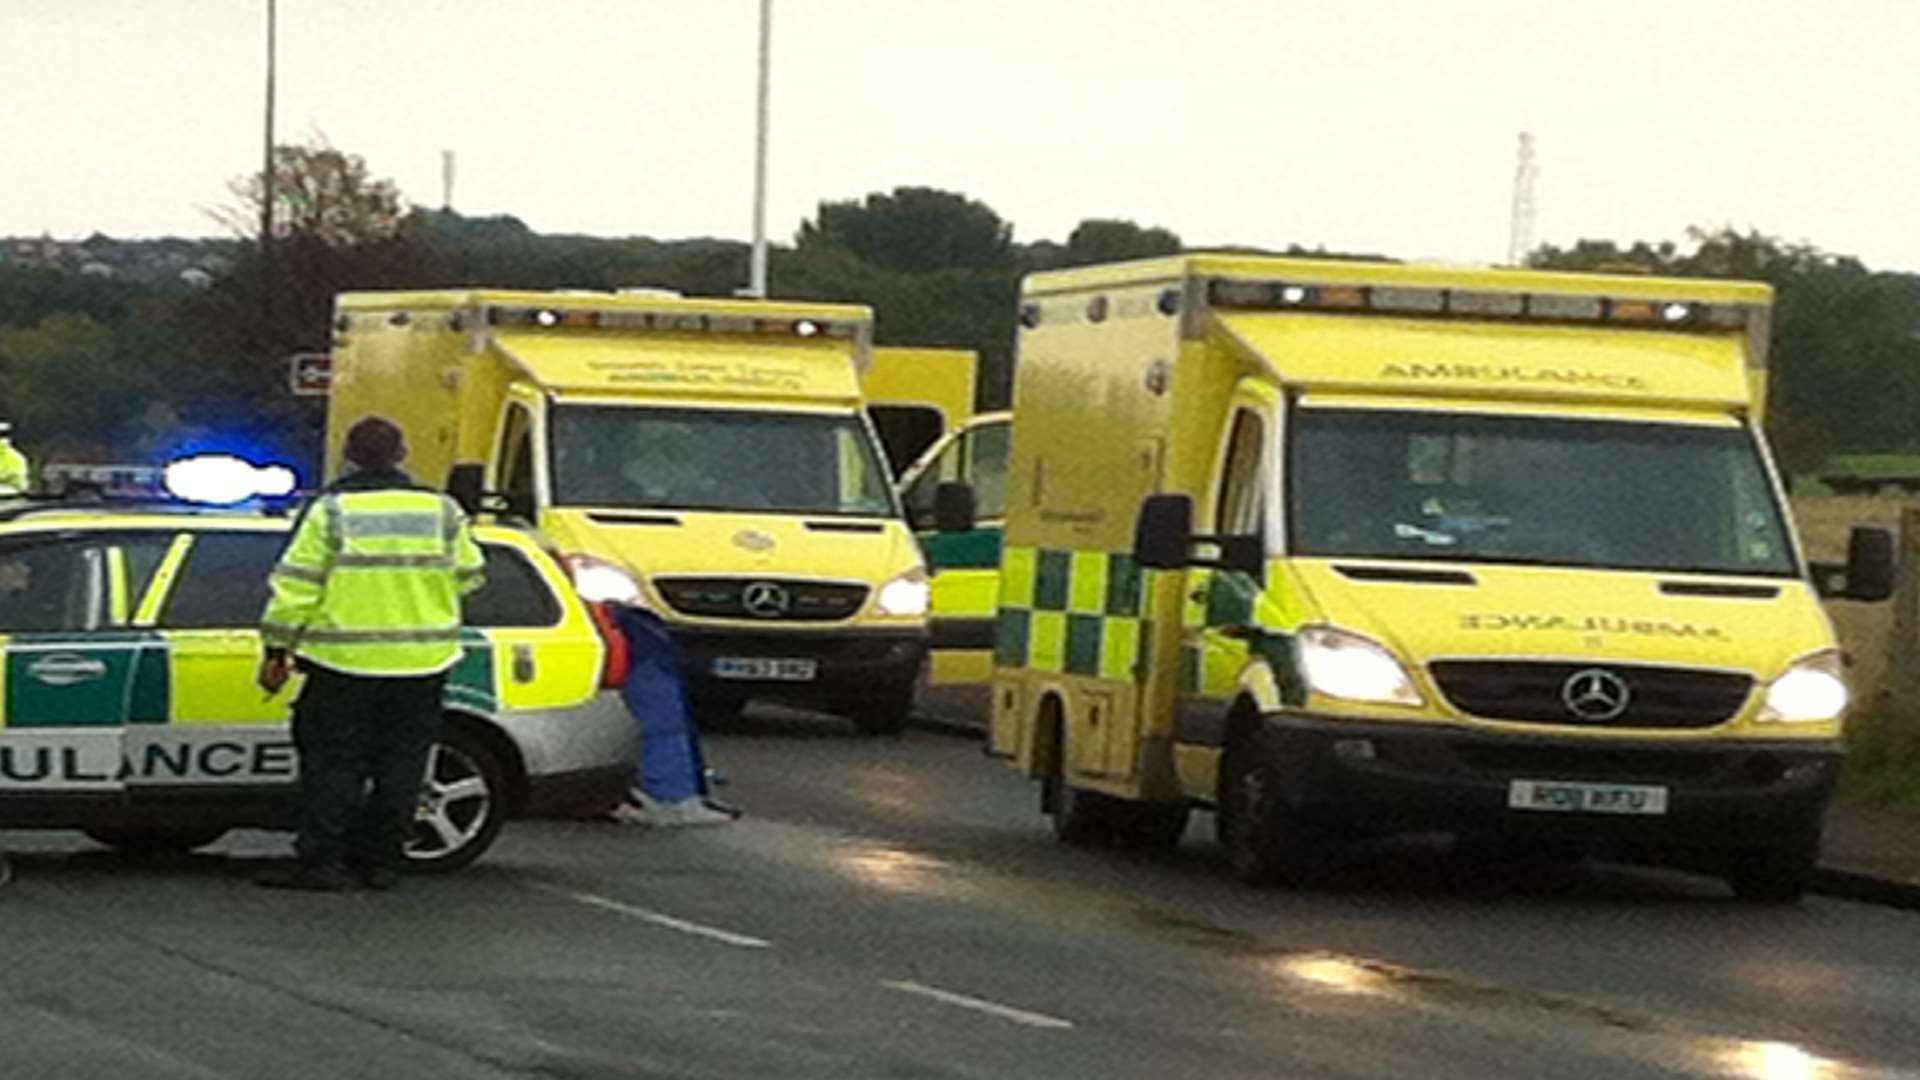 Police and paramedics were called to Charing Hill after a car hit a pedestrian